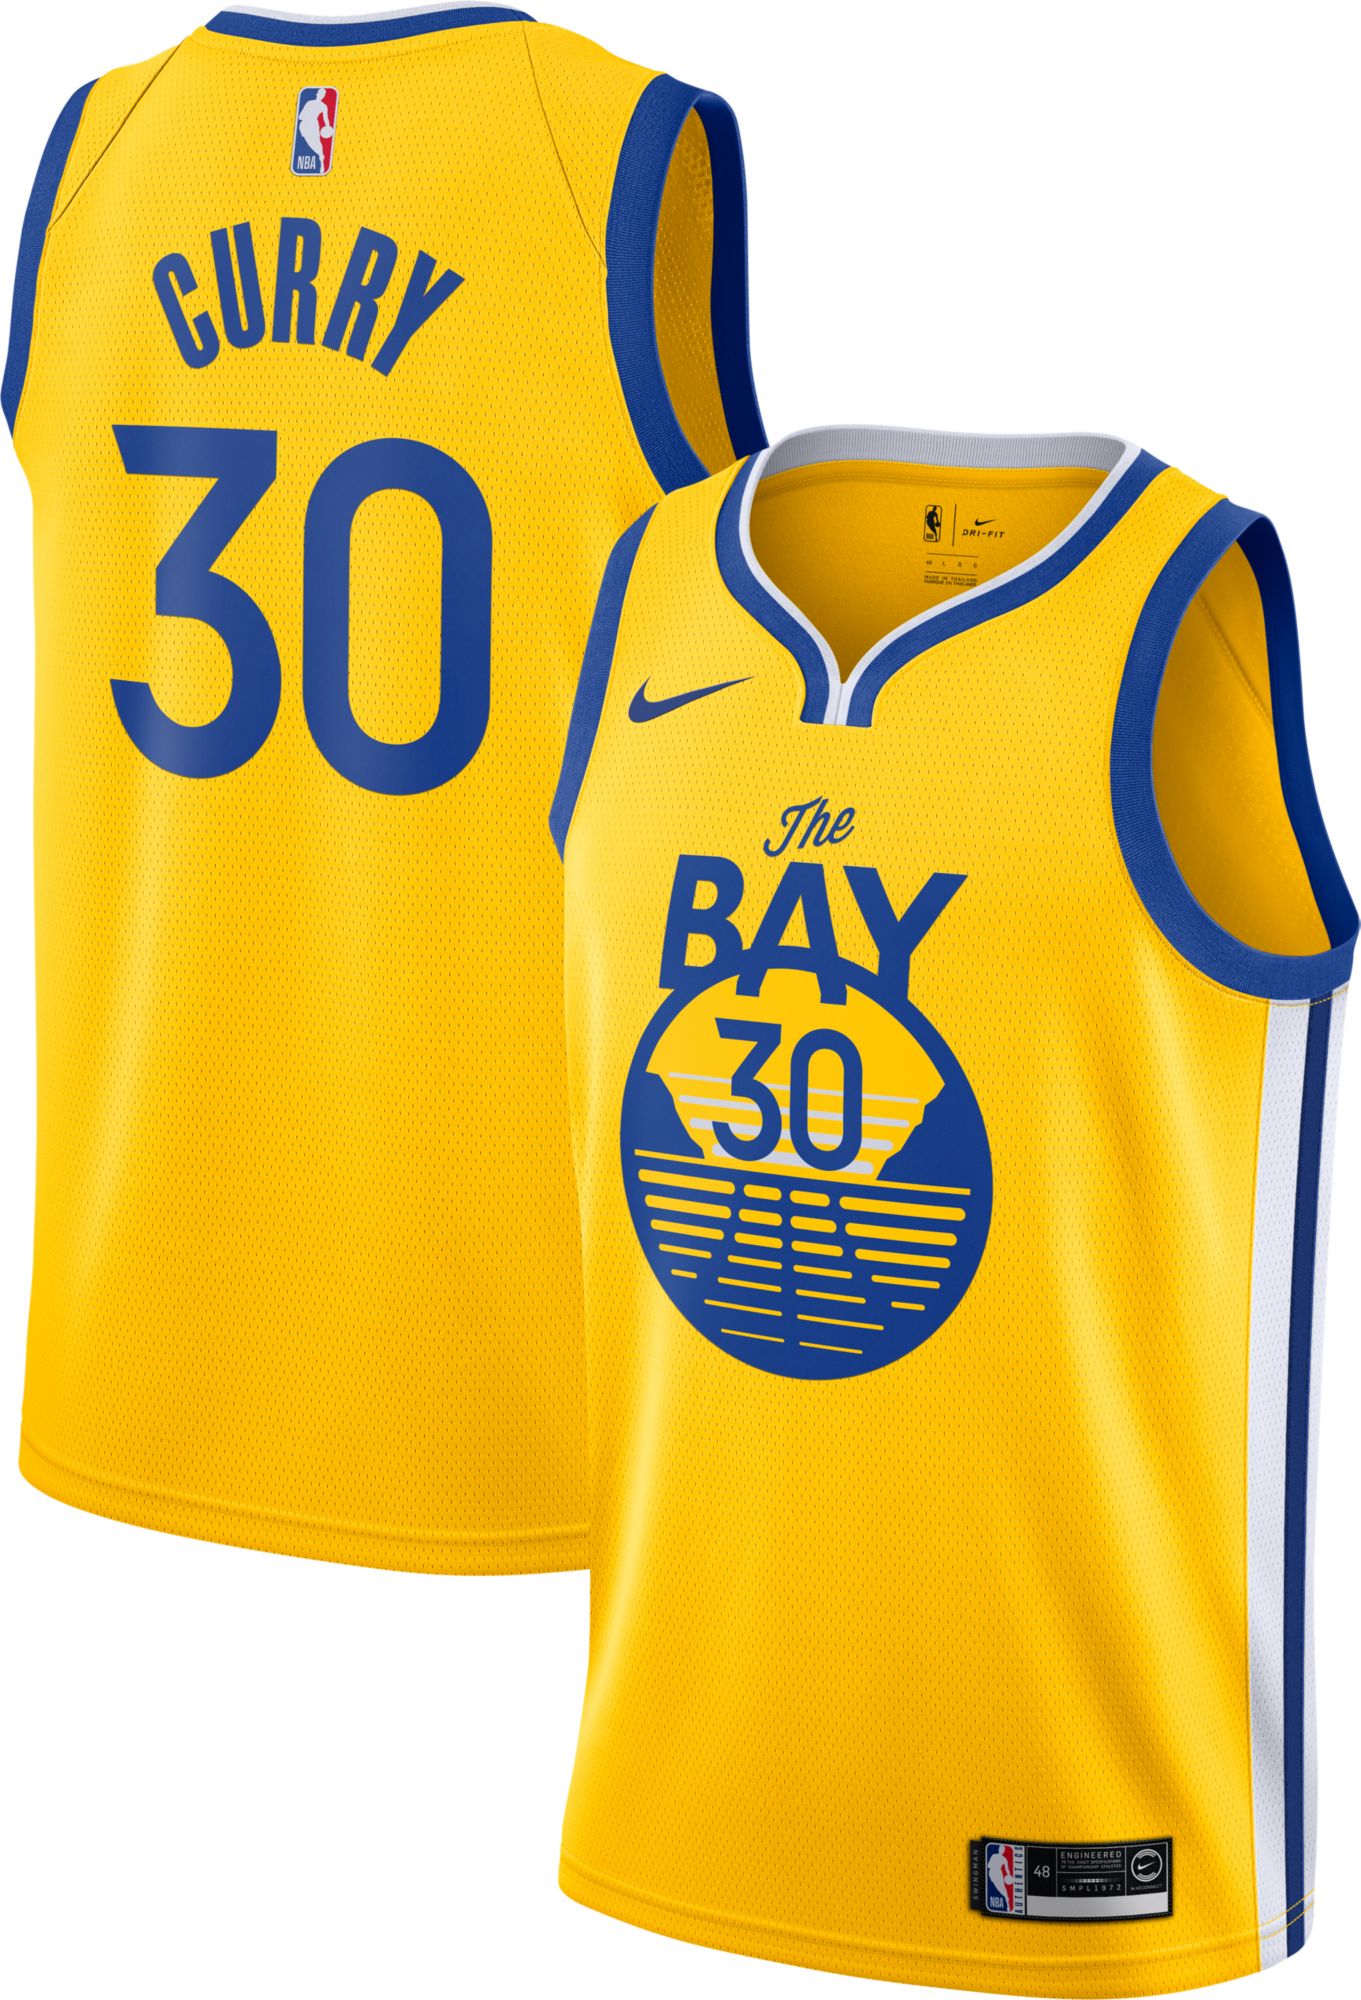 stephen curry jersey yellow